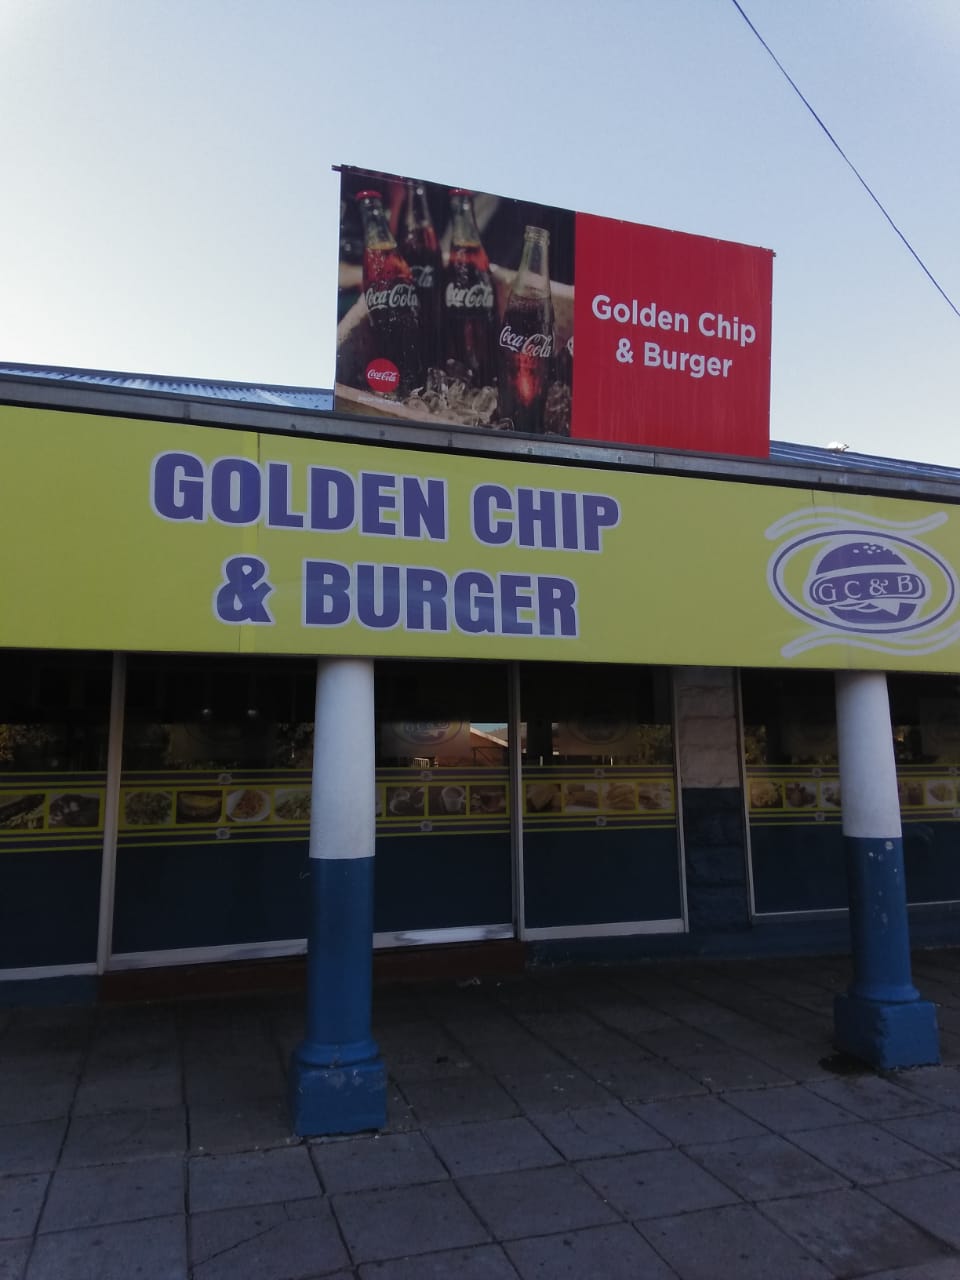 Golden chip and burger